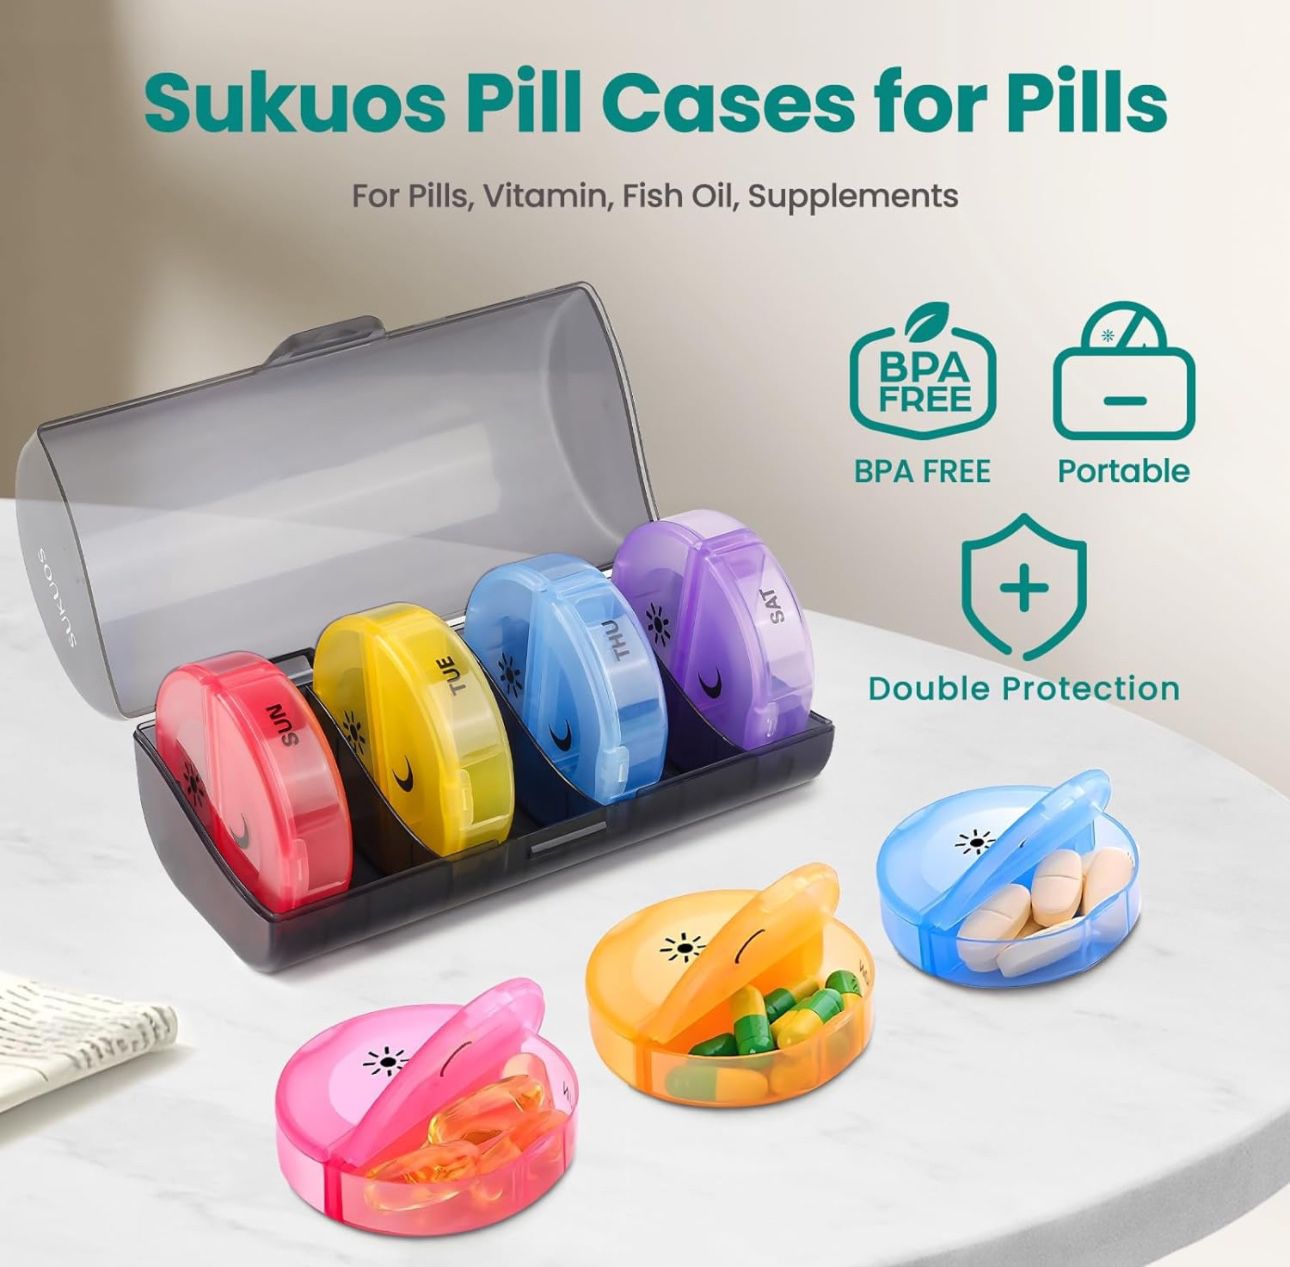 Sukuos Weekly Pill Organizer 7 Day 2 Times a Day, Large Daily Pill Box Easy to Open, BPA Free AM PM Pill Case for Medicine/Vitamin/Fish Oil/Supplement